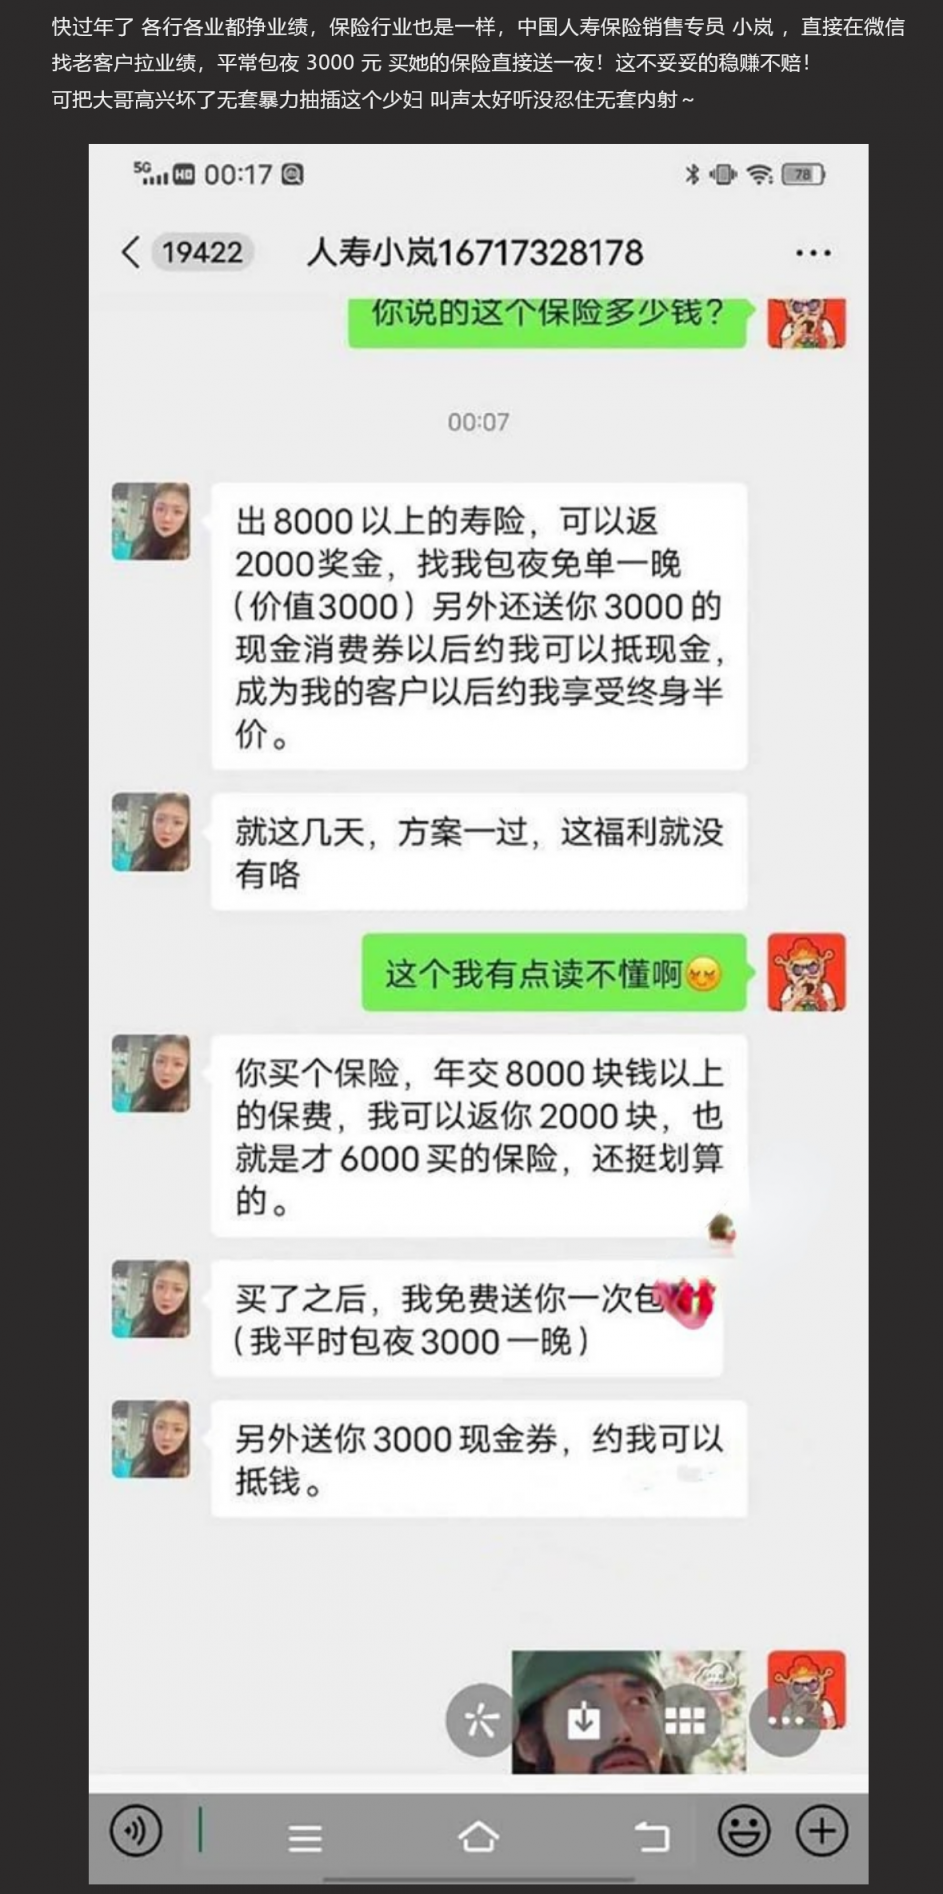 China's life insurance sales are popular all over the Internet, buy insurance and get free money